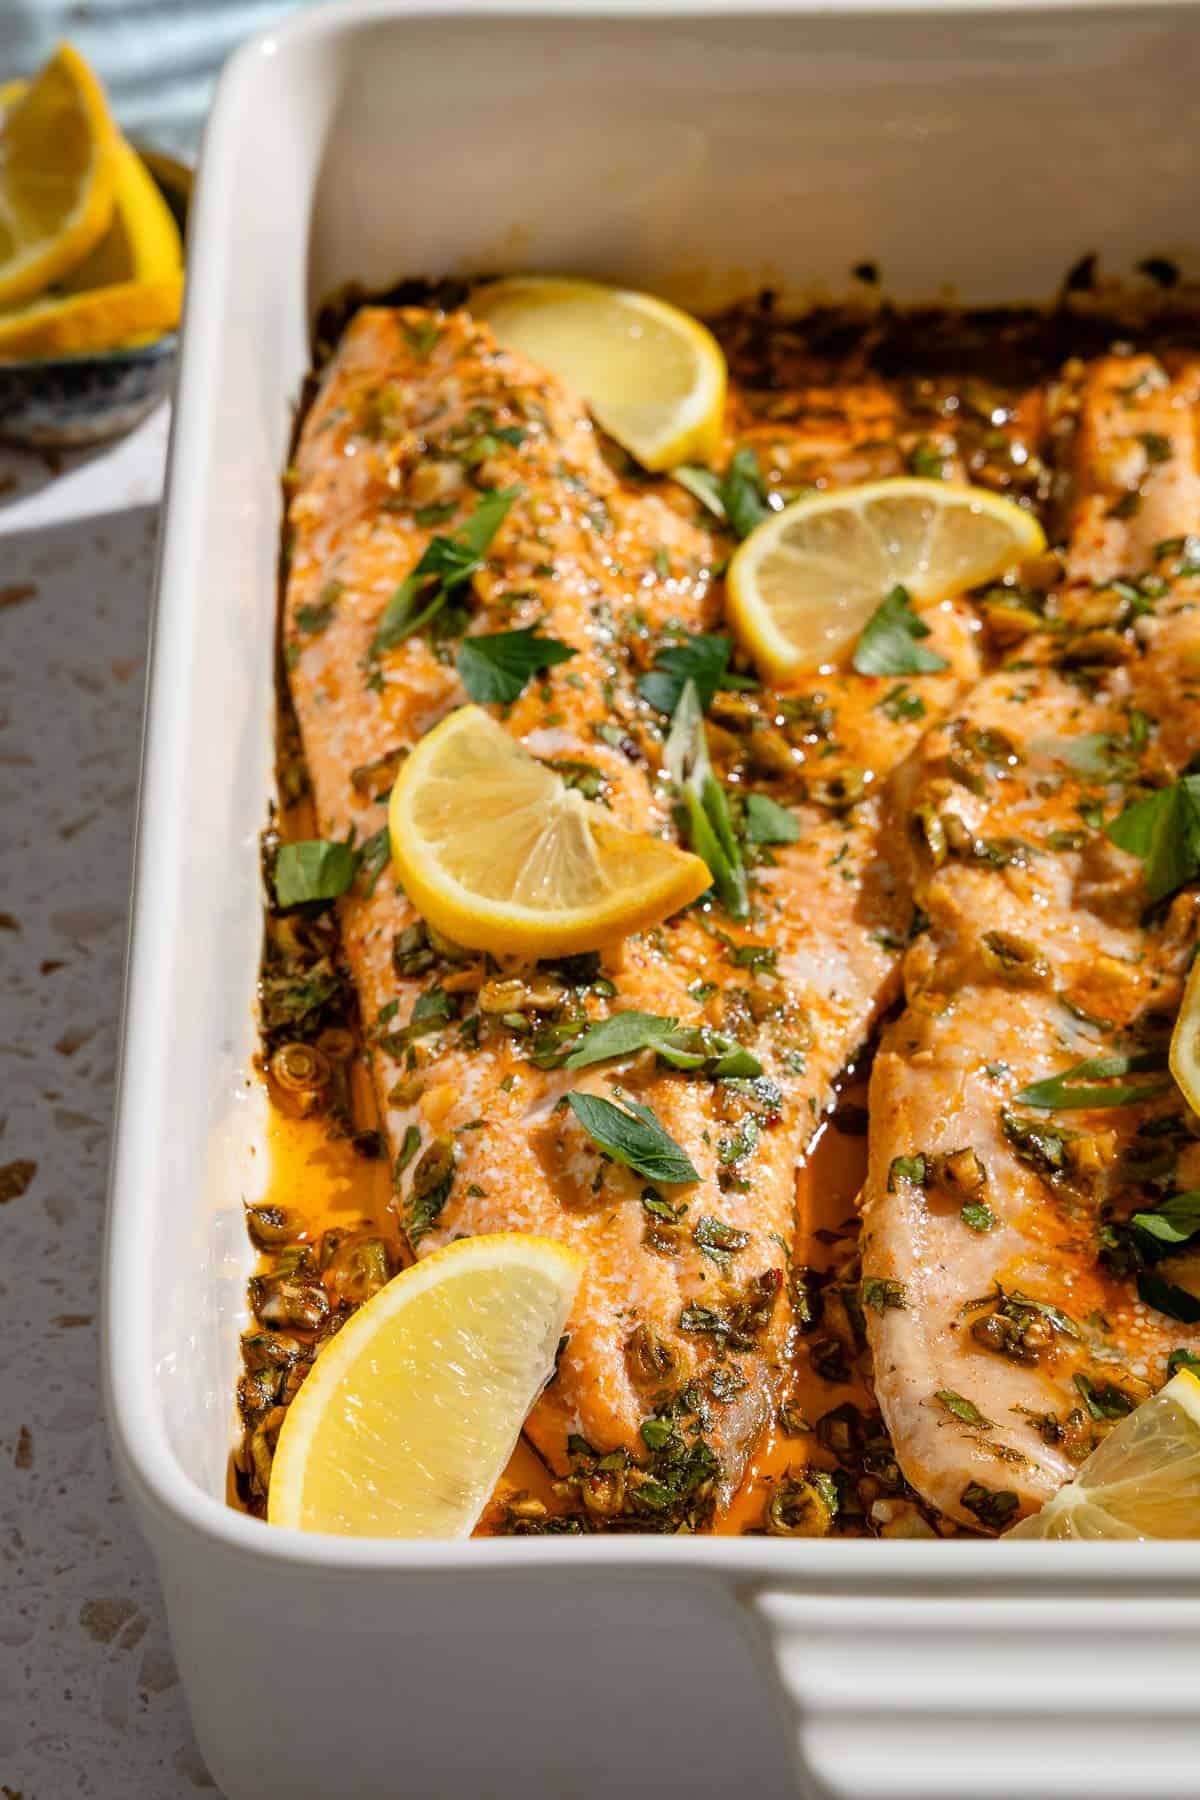 A close up of baked trout garnished with parsley and green onions in a baking dish next to a small bowl of lemon wedges.